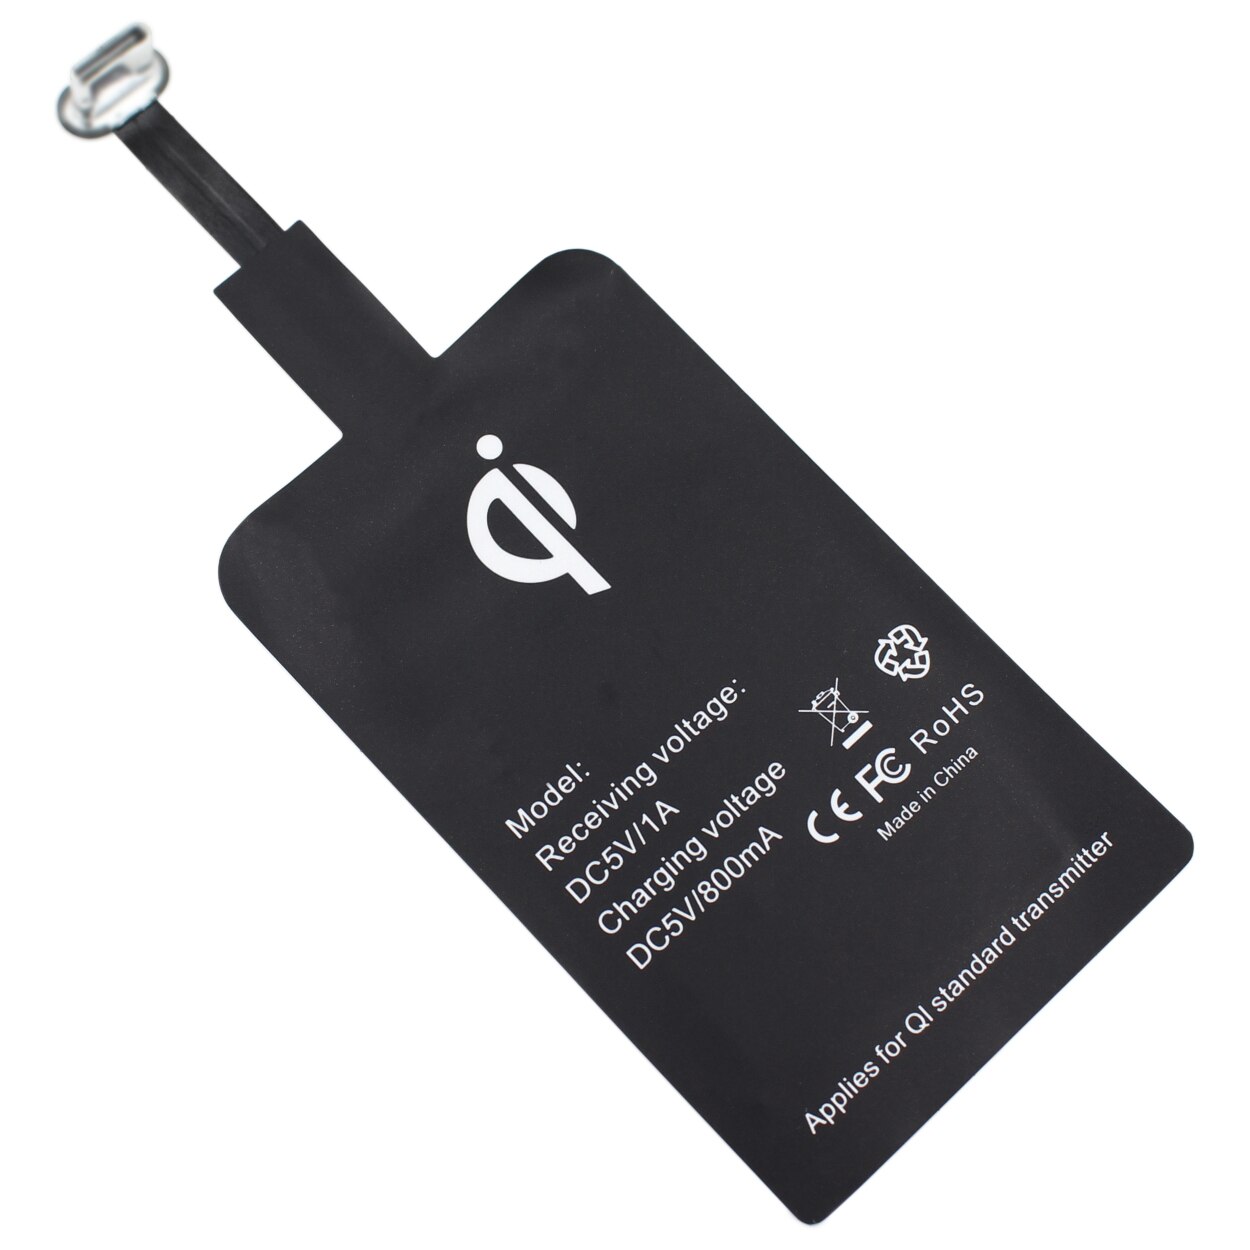 Qi Draadloos Opladen Receiver Charger Module Voor Sony Xperia Xz X Compact